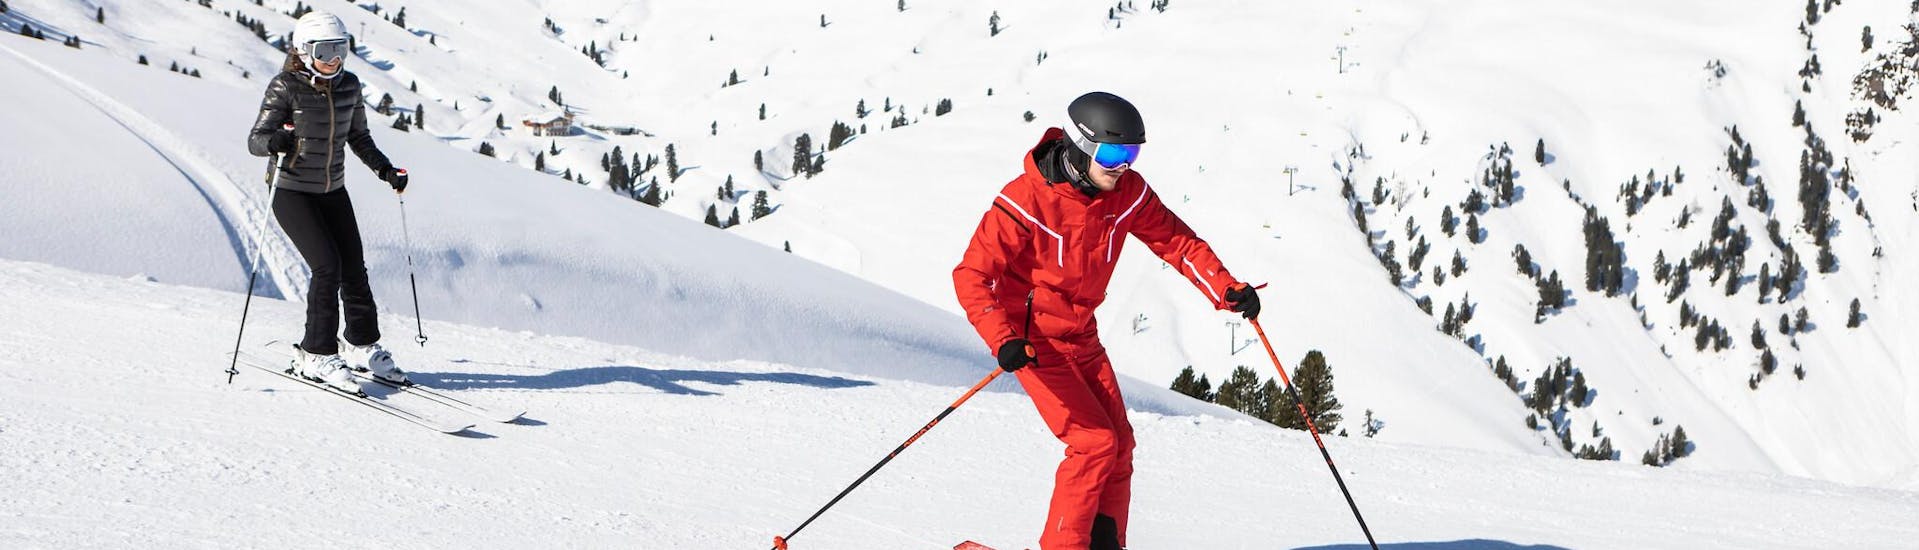 A skier practices the correct skiing technique during one of the private lessons in Grimentz-Zinal.